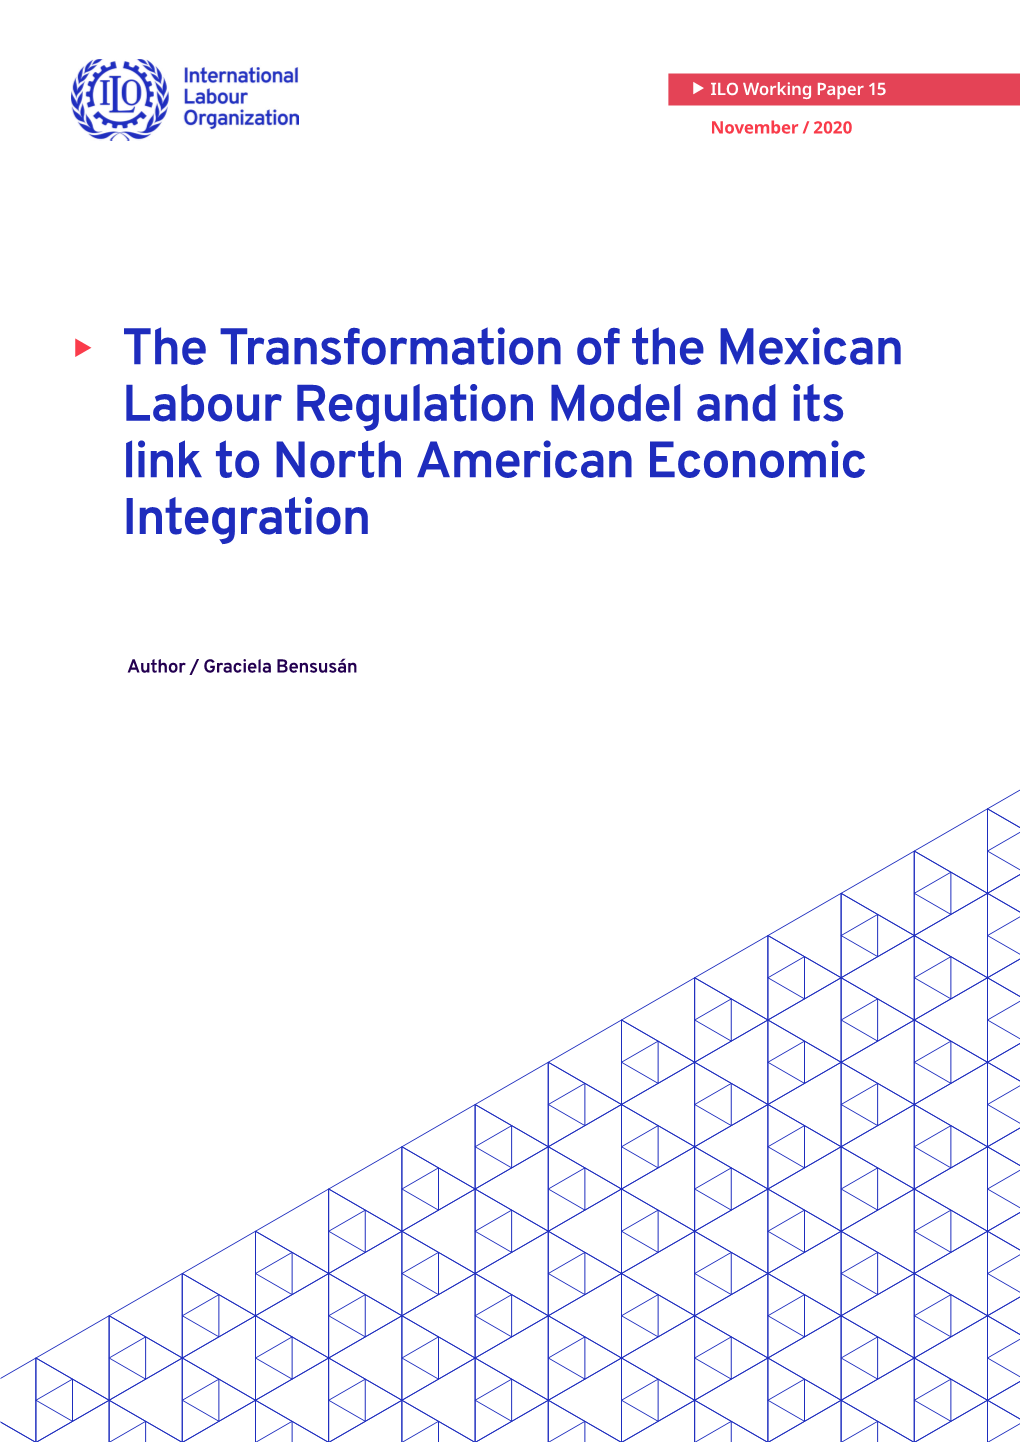 The Transformation of the Mexican Labour Regulation Model and Its Link to North American Economic Integration